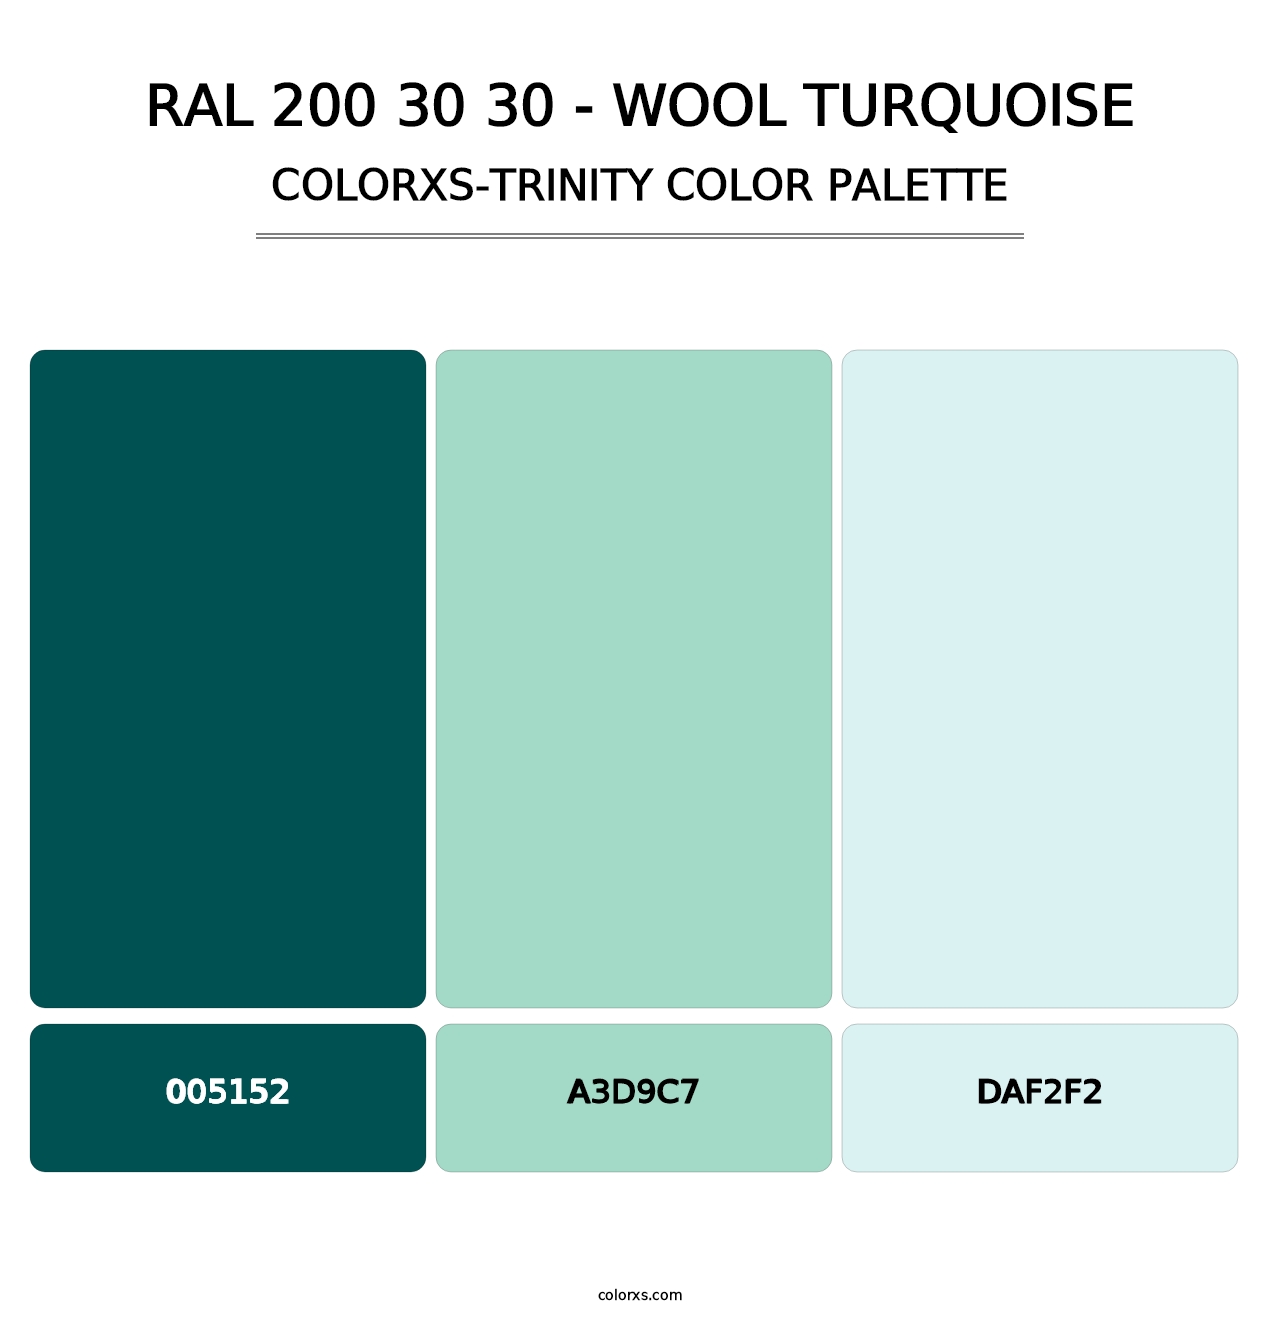 RAL 200 30 30 - Wool Turquoise - Colorxs Trinity Palette